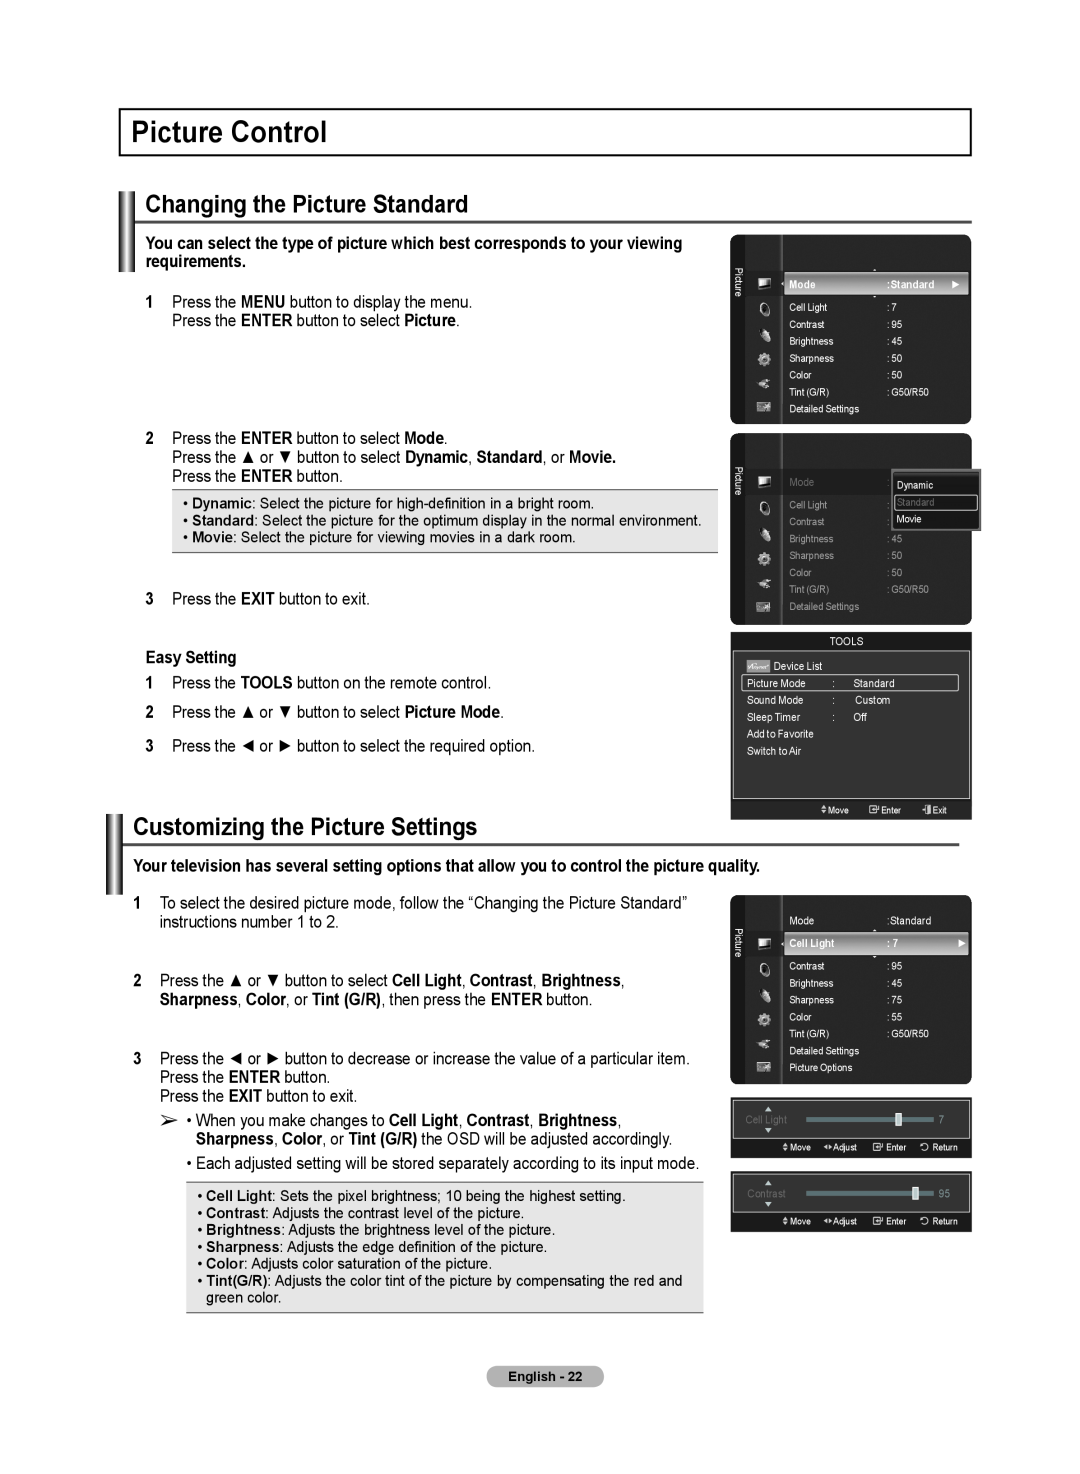 Samsung 510 user manual Picture Control, Changing the Picture Standard, Customizing the Picture Settings, Easy Setting 